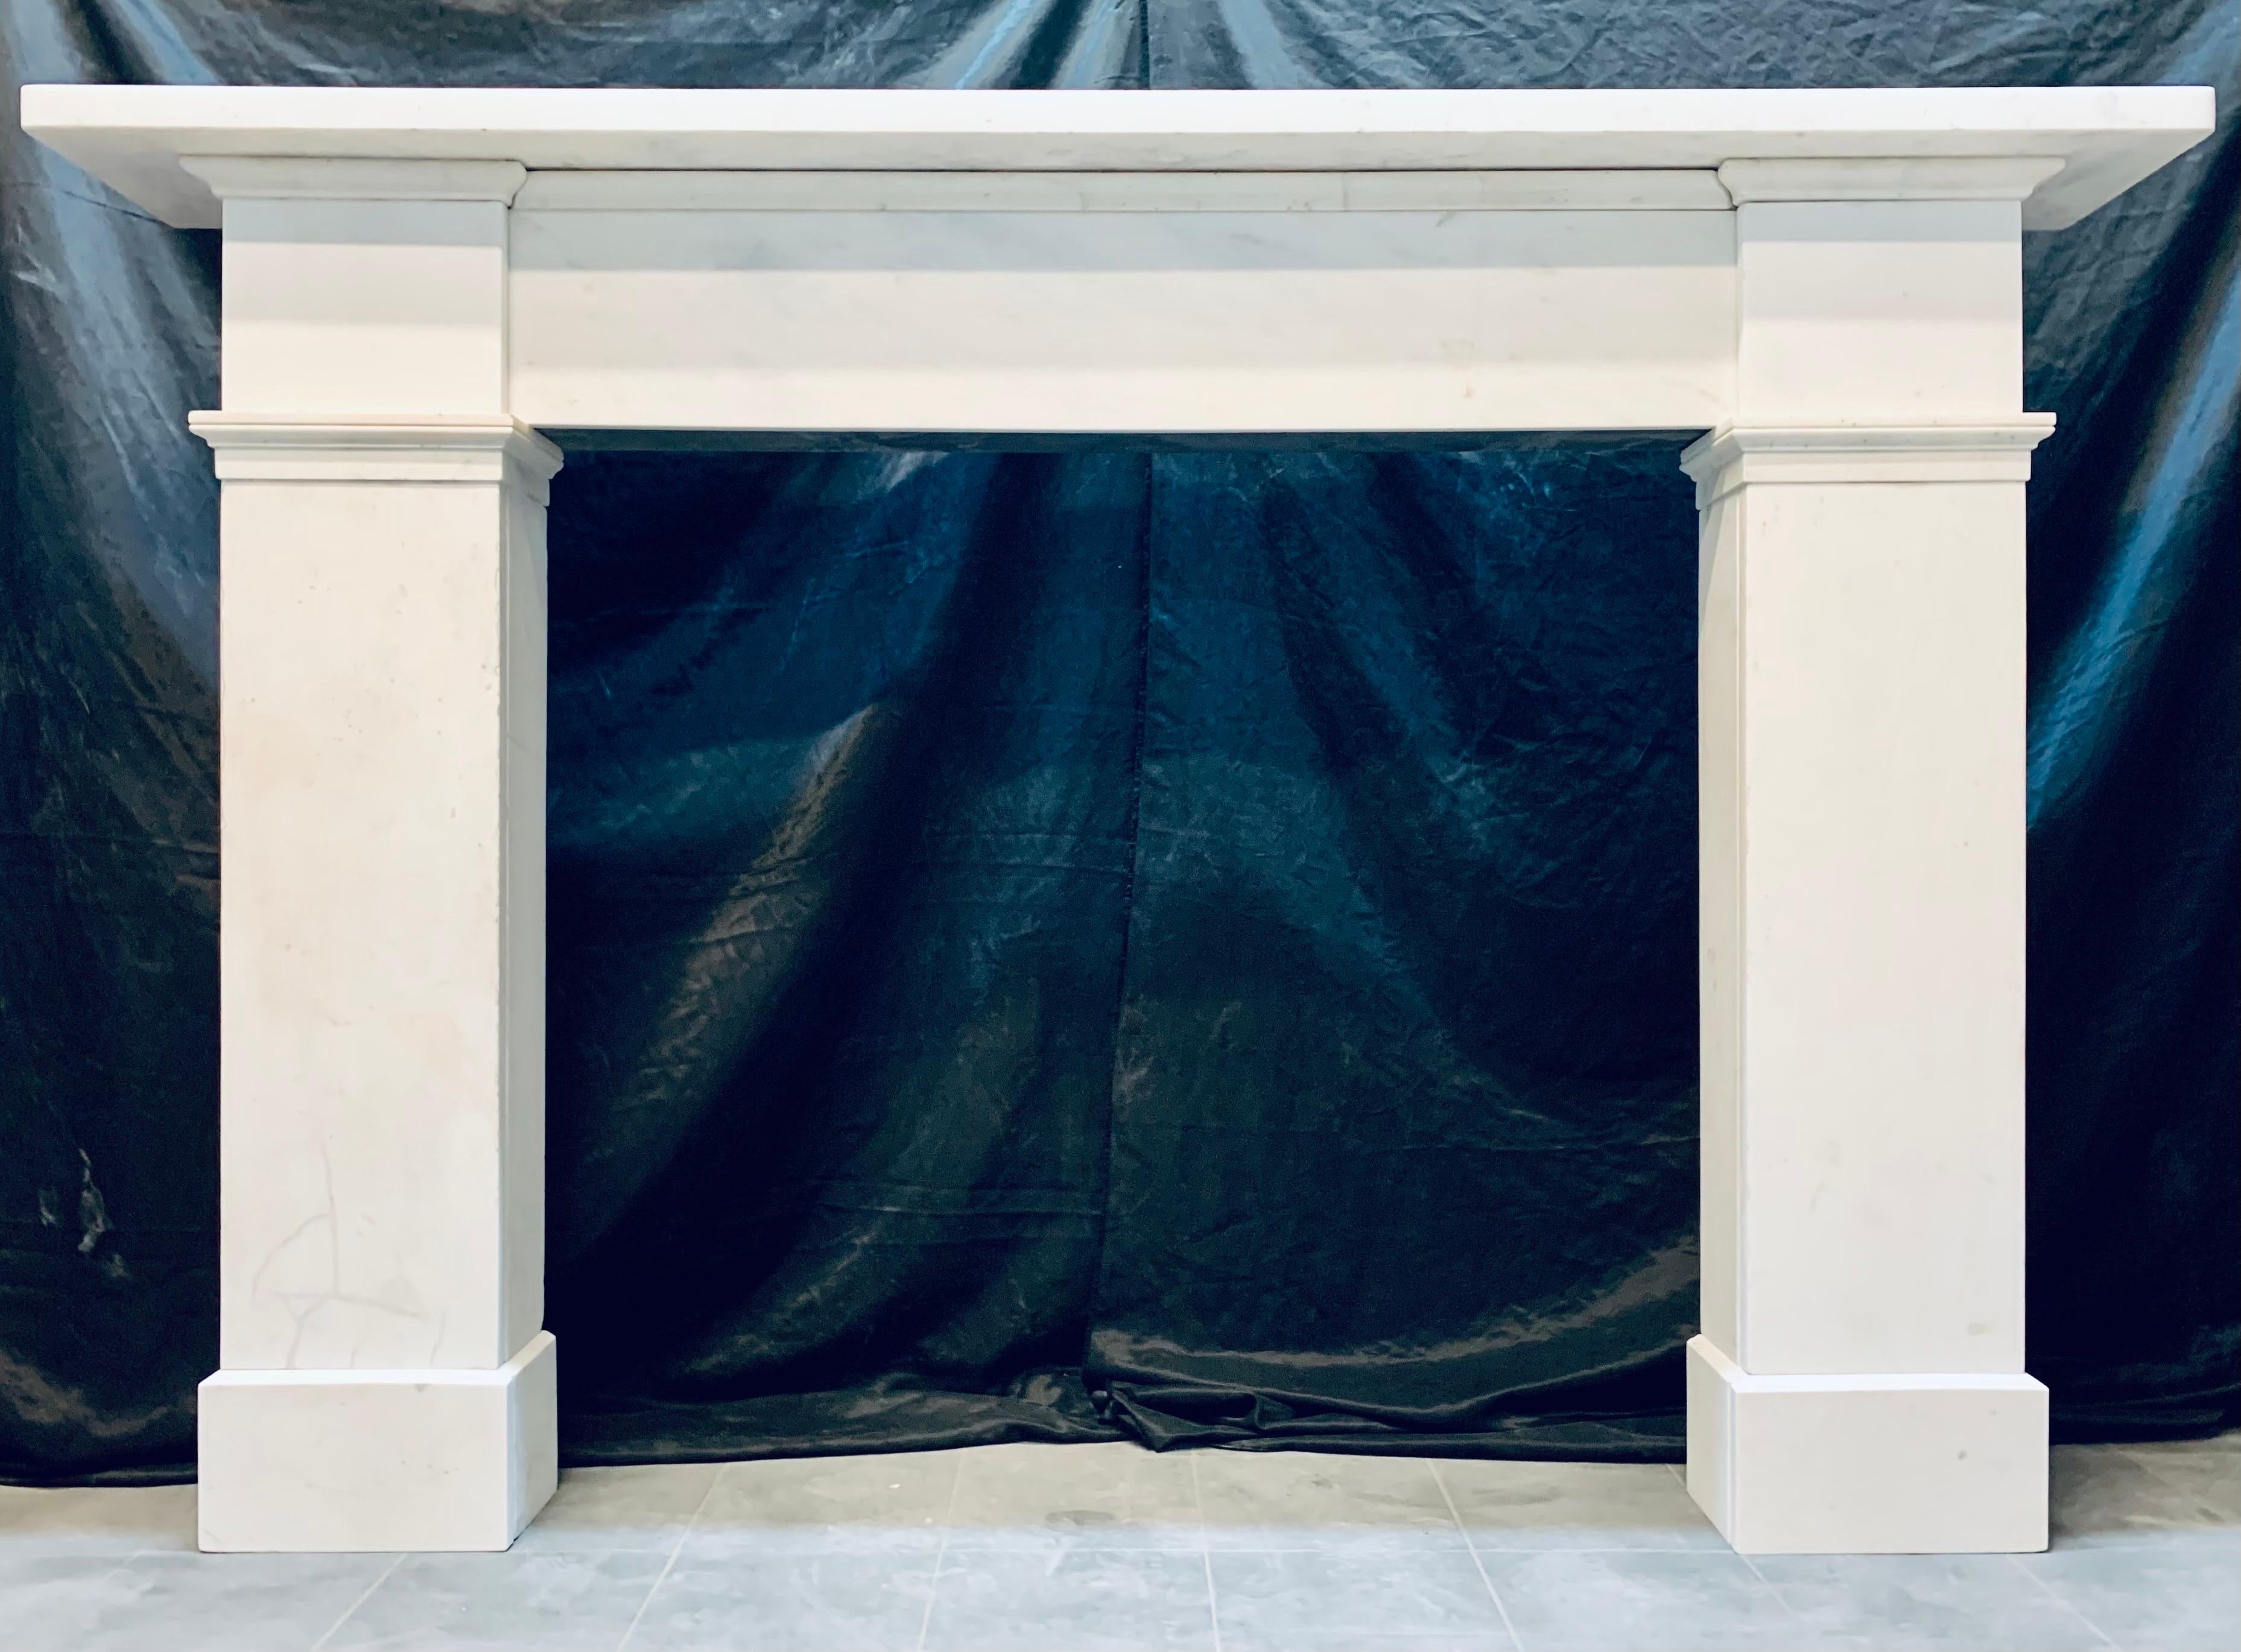 A very large Scottish Georgian early 19th
century statuary marble fireplace surround
originally from Edinburgh's New Town.

A generous square edged top shelf, sits
above an unadorned central frieze with a full wrap around top cornice, 
flanked by